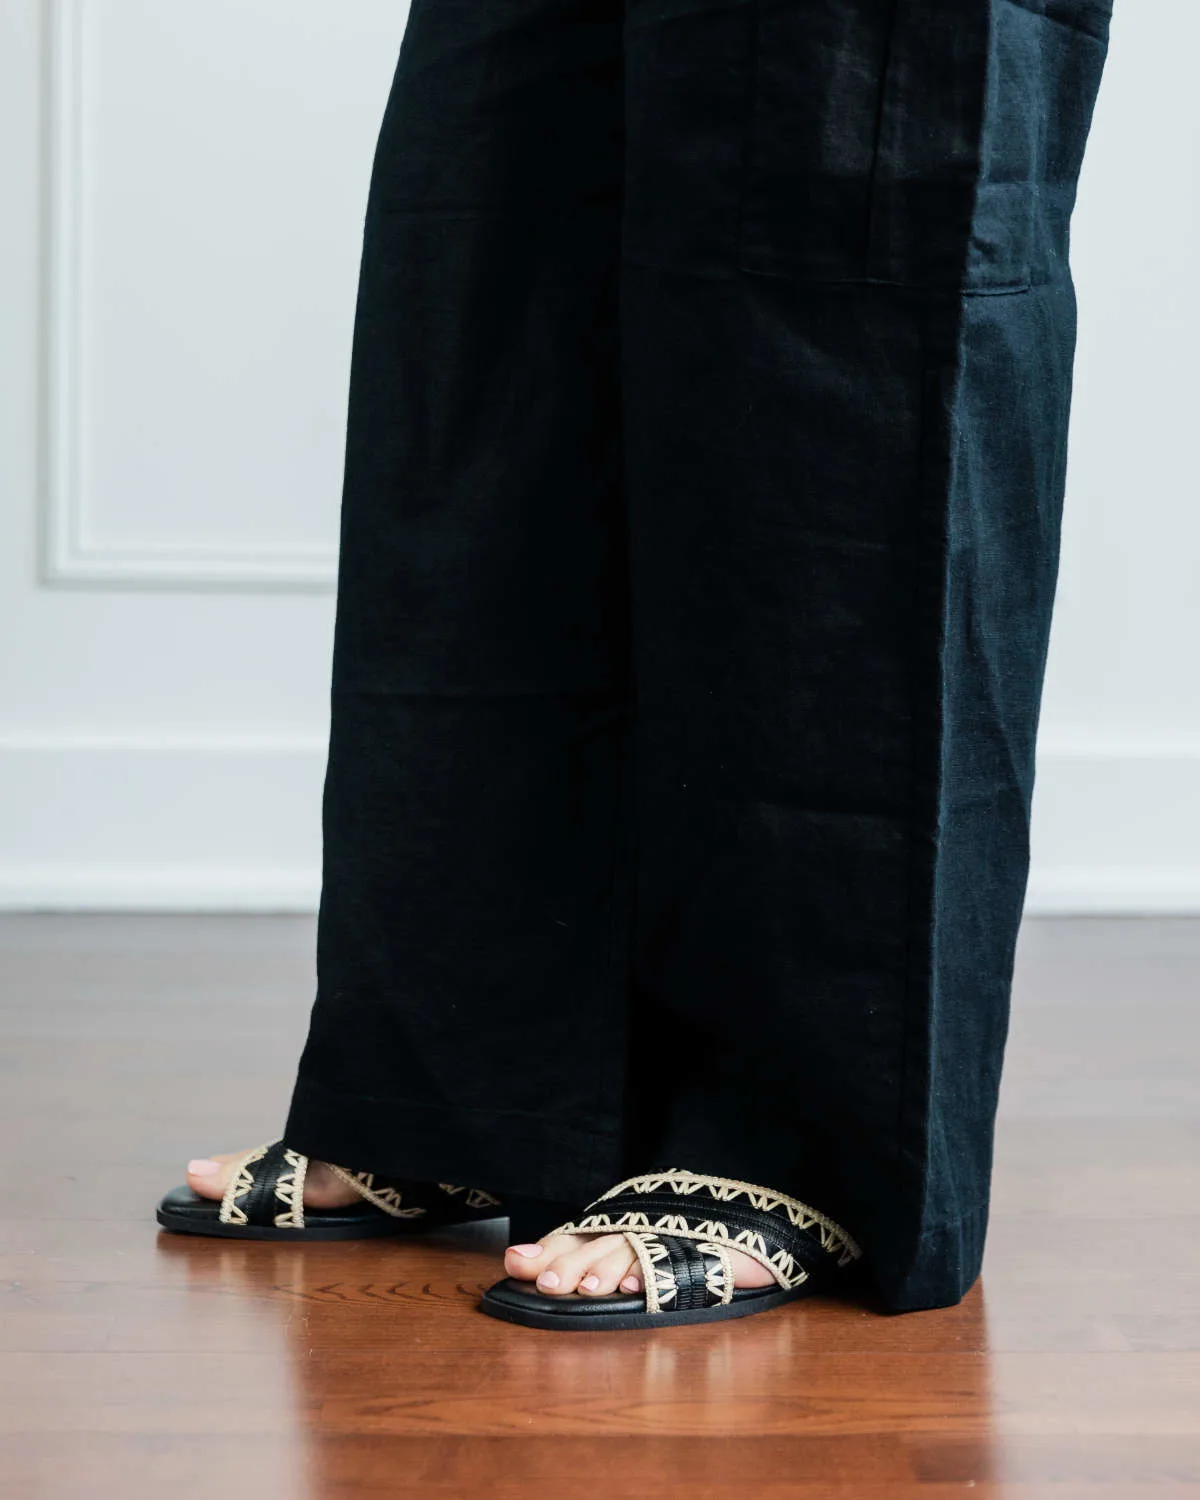 Cropped view of woman's legs wearing black and tan slide sandals with full length wide leg black linen pants.